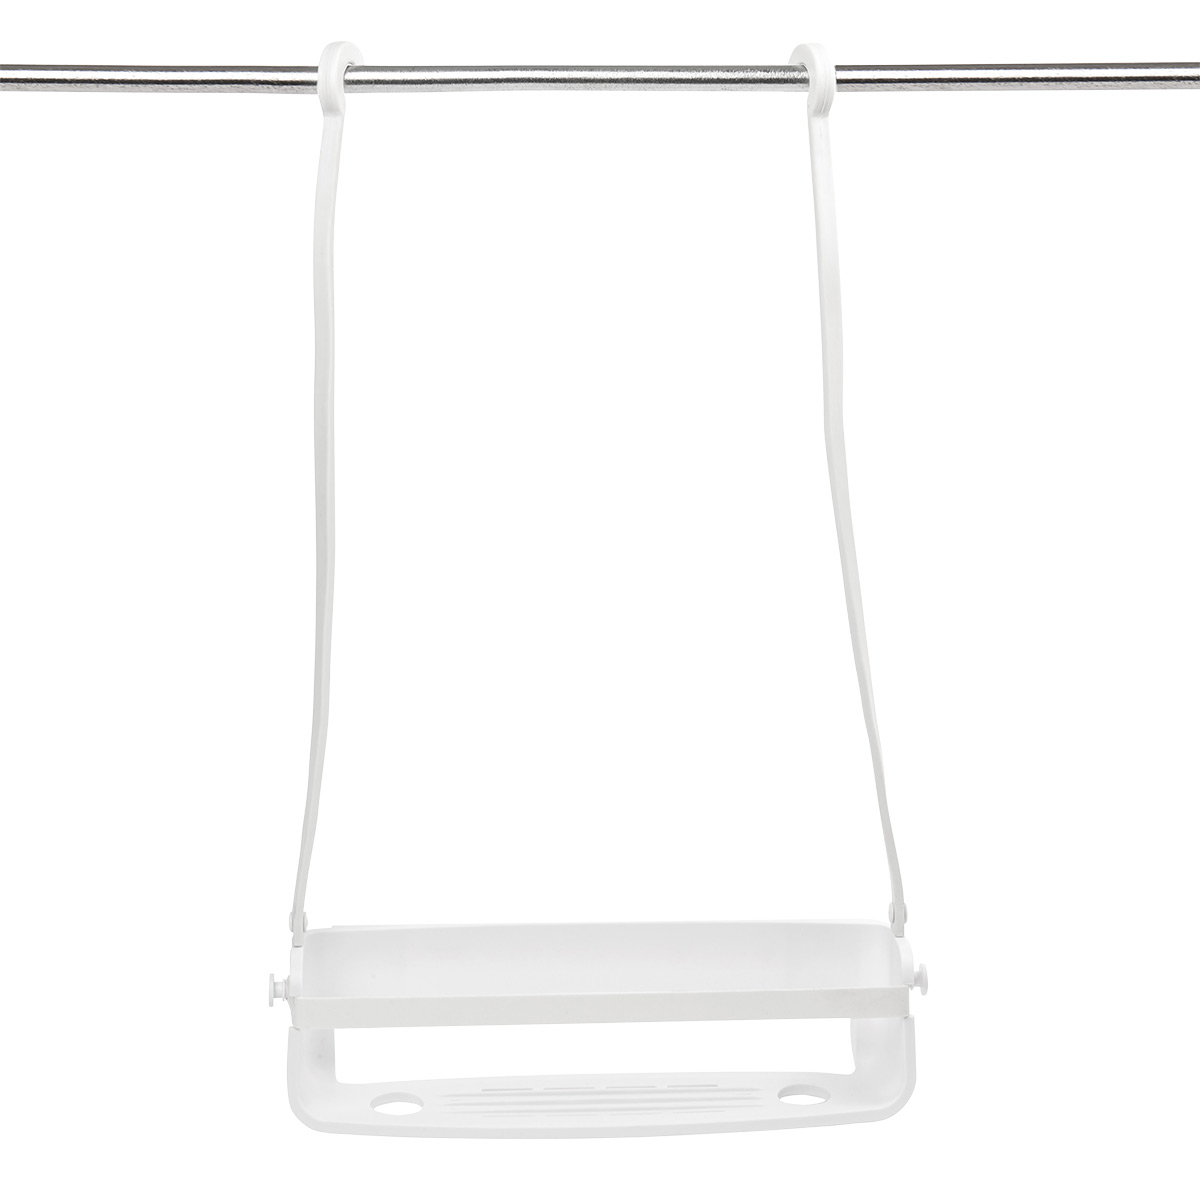 https://www.containerstore.com/catalogimages/412568/10073936-Umbra-Shower-Caddy-VEN1.jpg